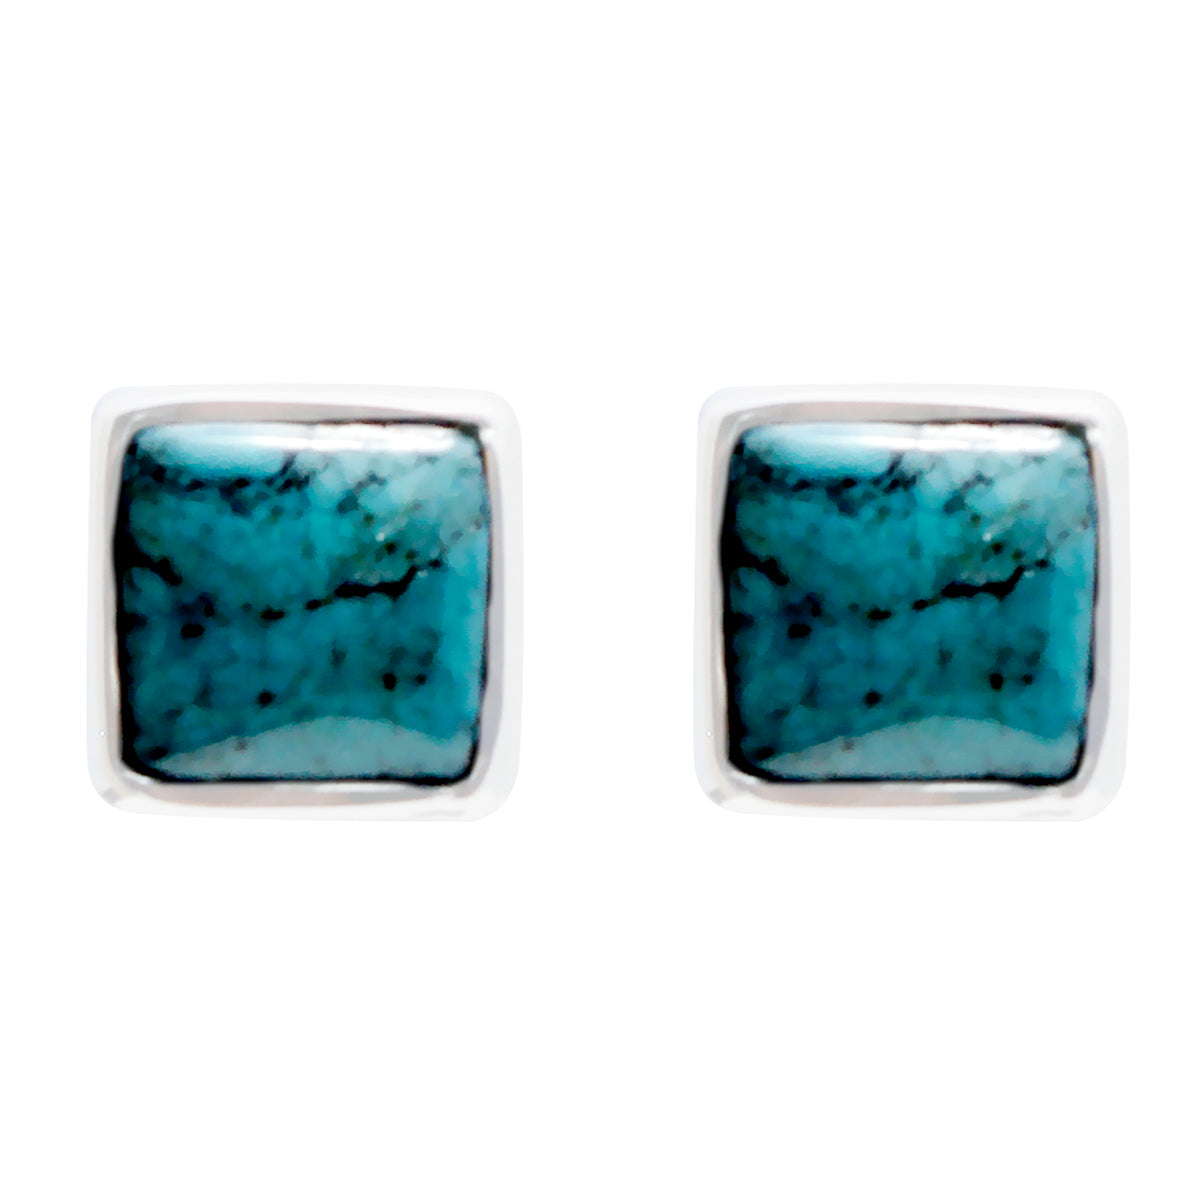 Riyo Genuine Gems square Cabochon Multi Turquoise Silver Earrings gift for black Friday